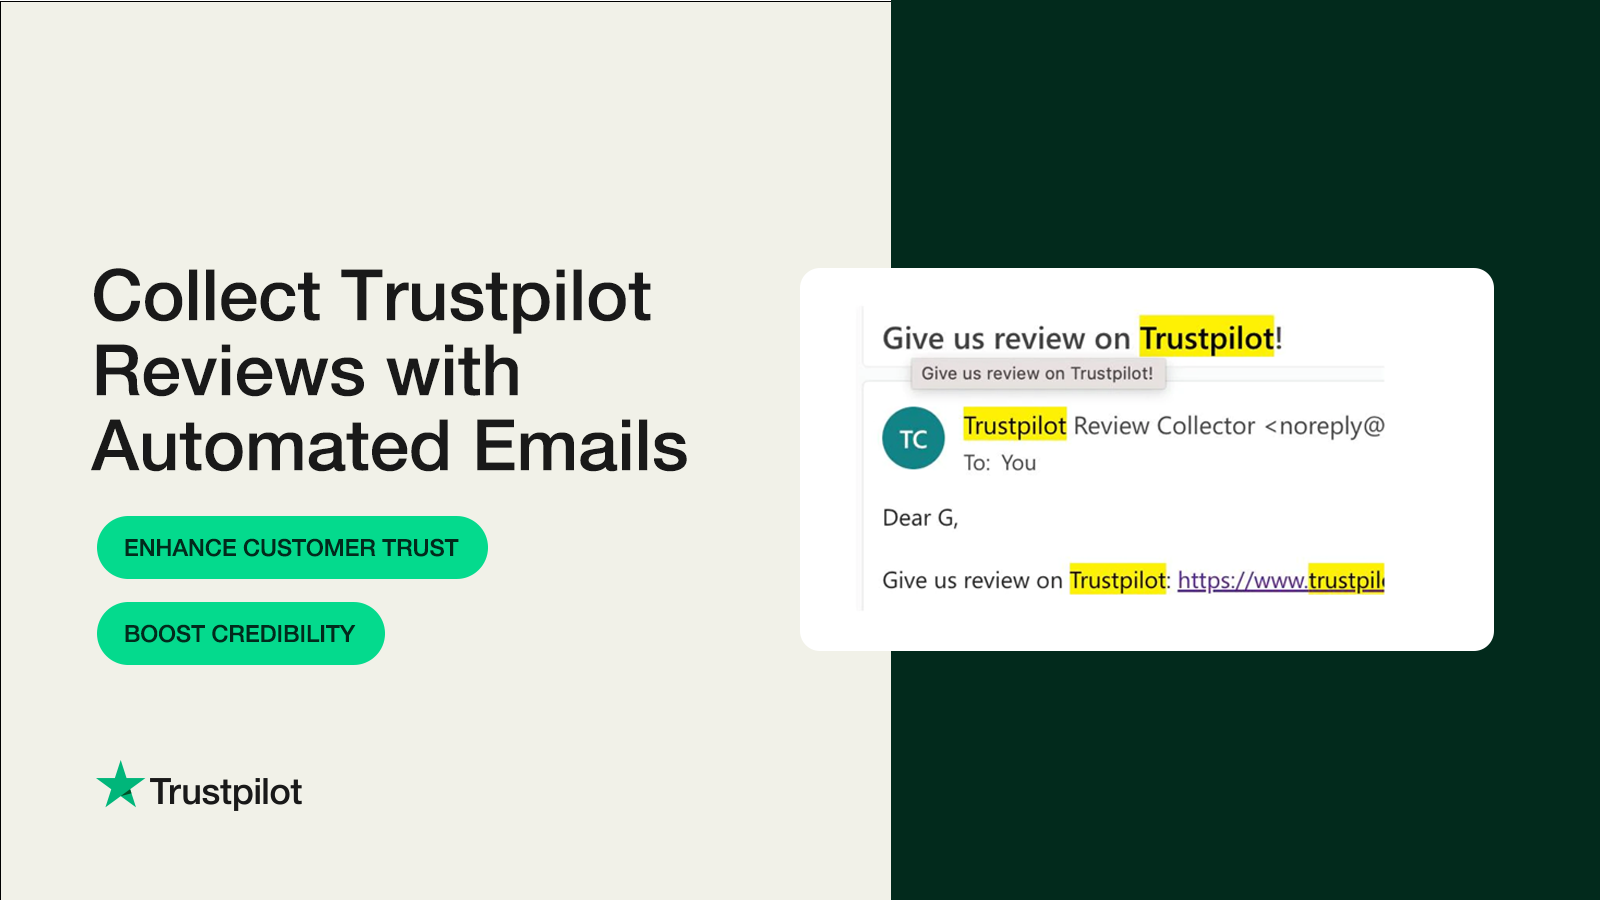 Collect Trustpilot Reviews with Automated Emails